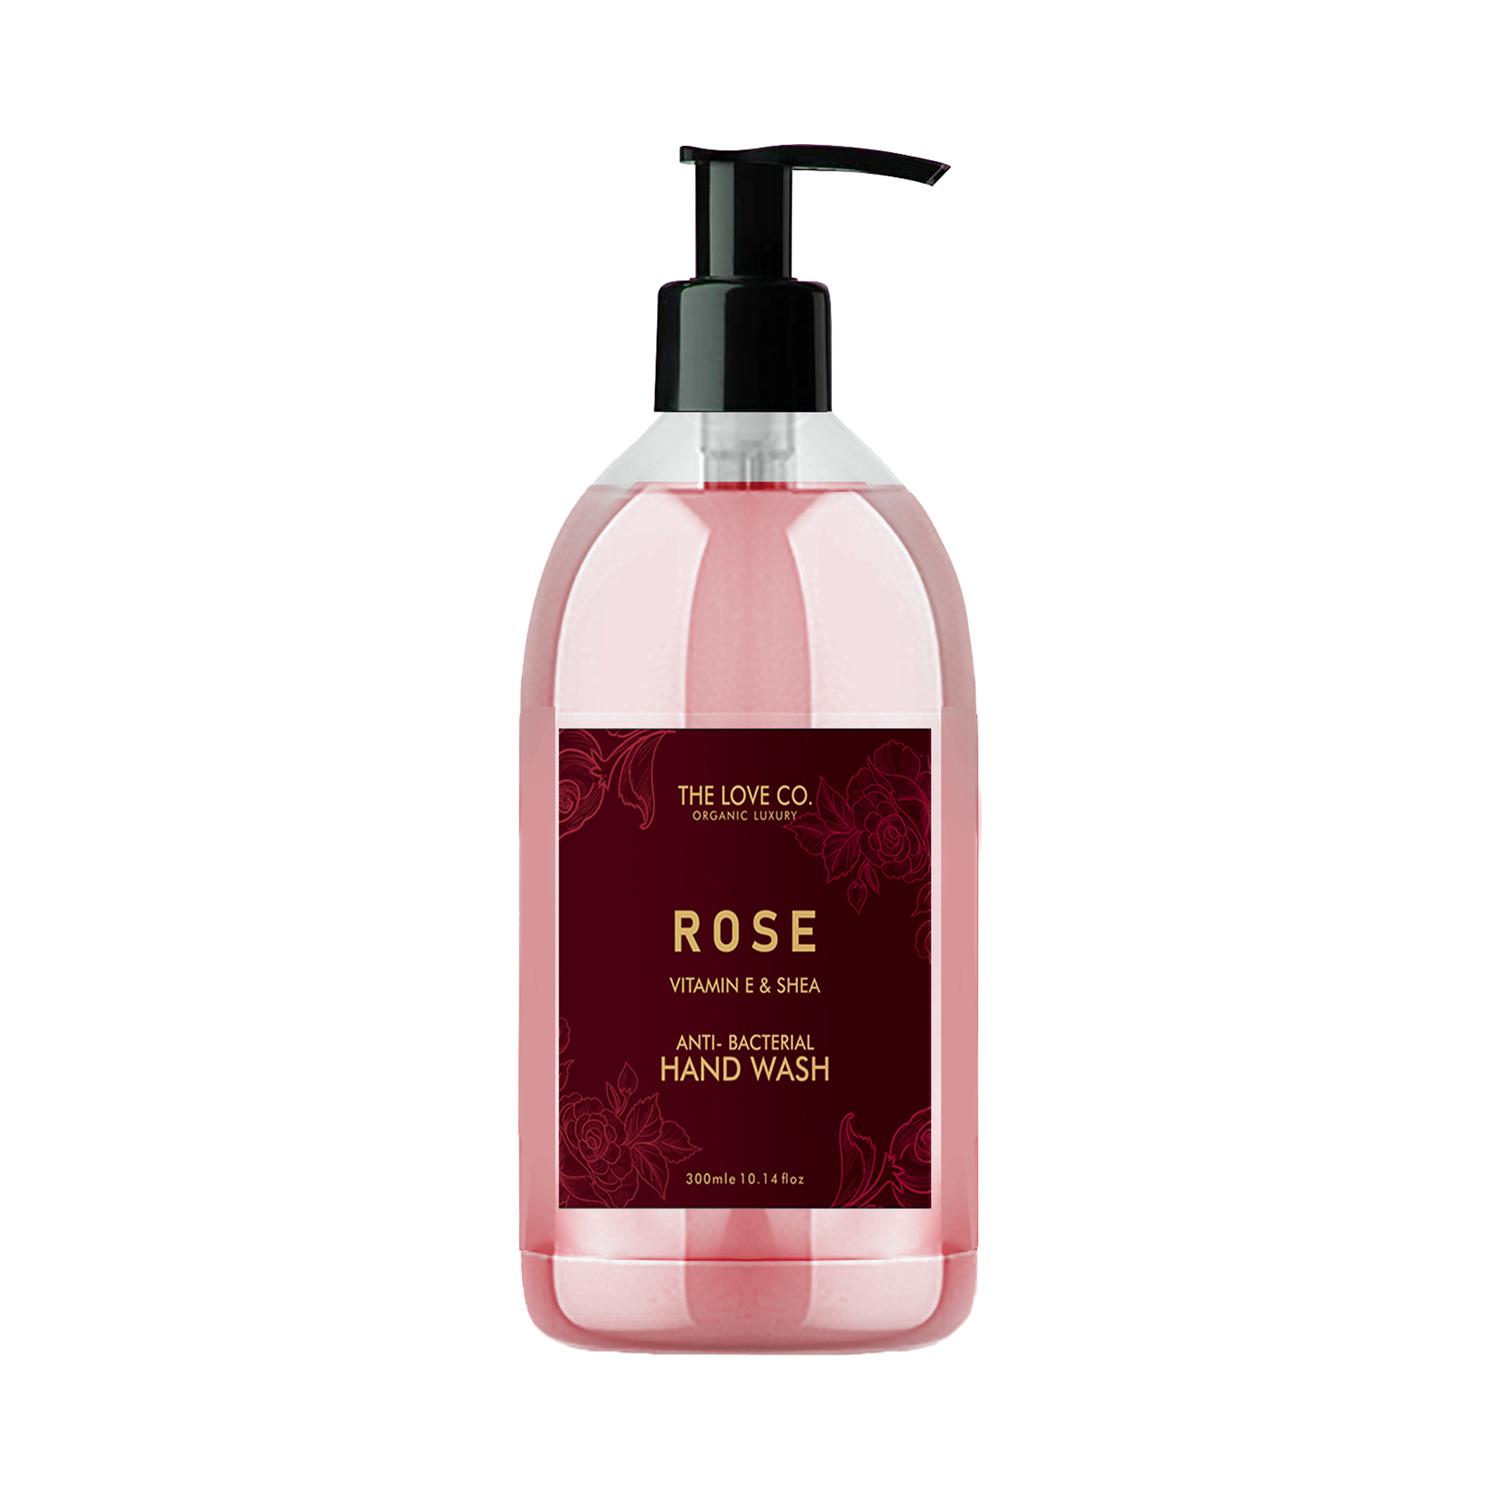 THE LOVE CO. | THE LOVE CO. Rose Hand Wash (300ml)